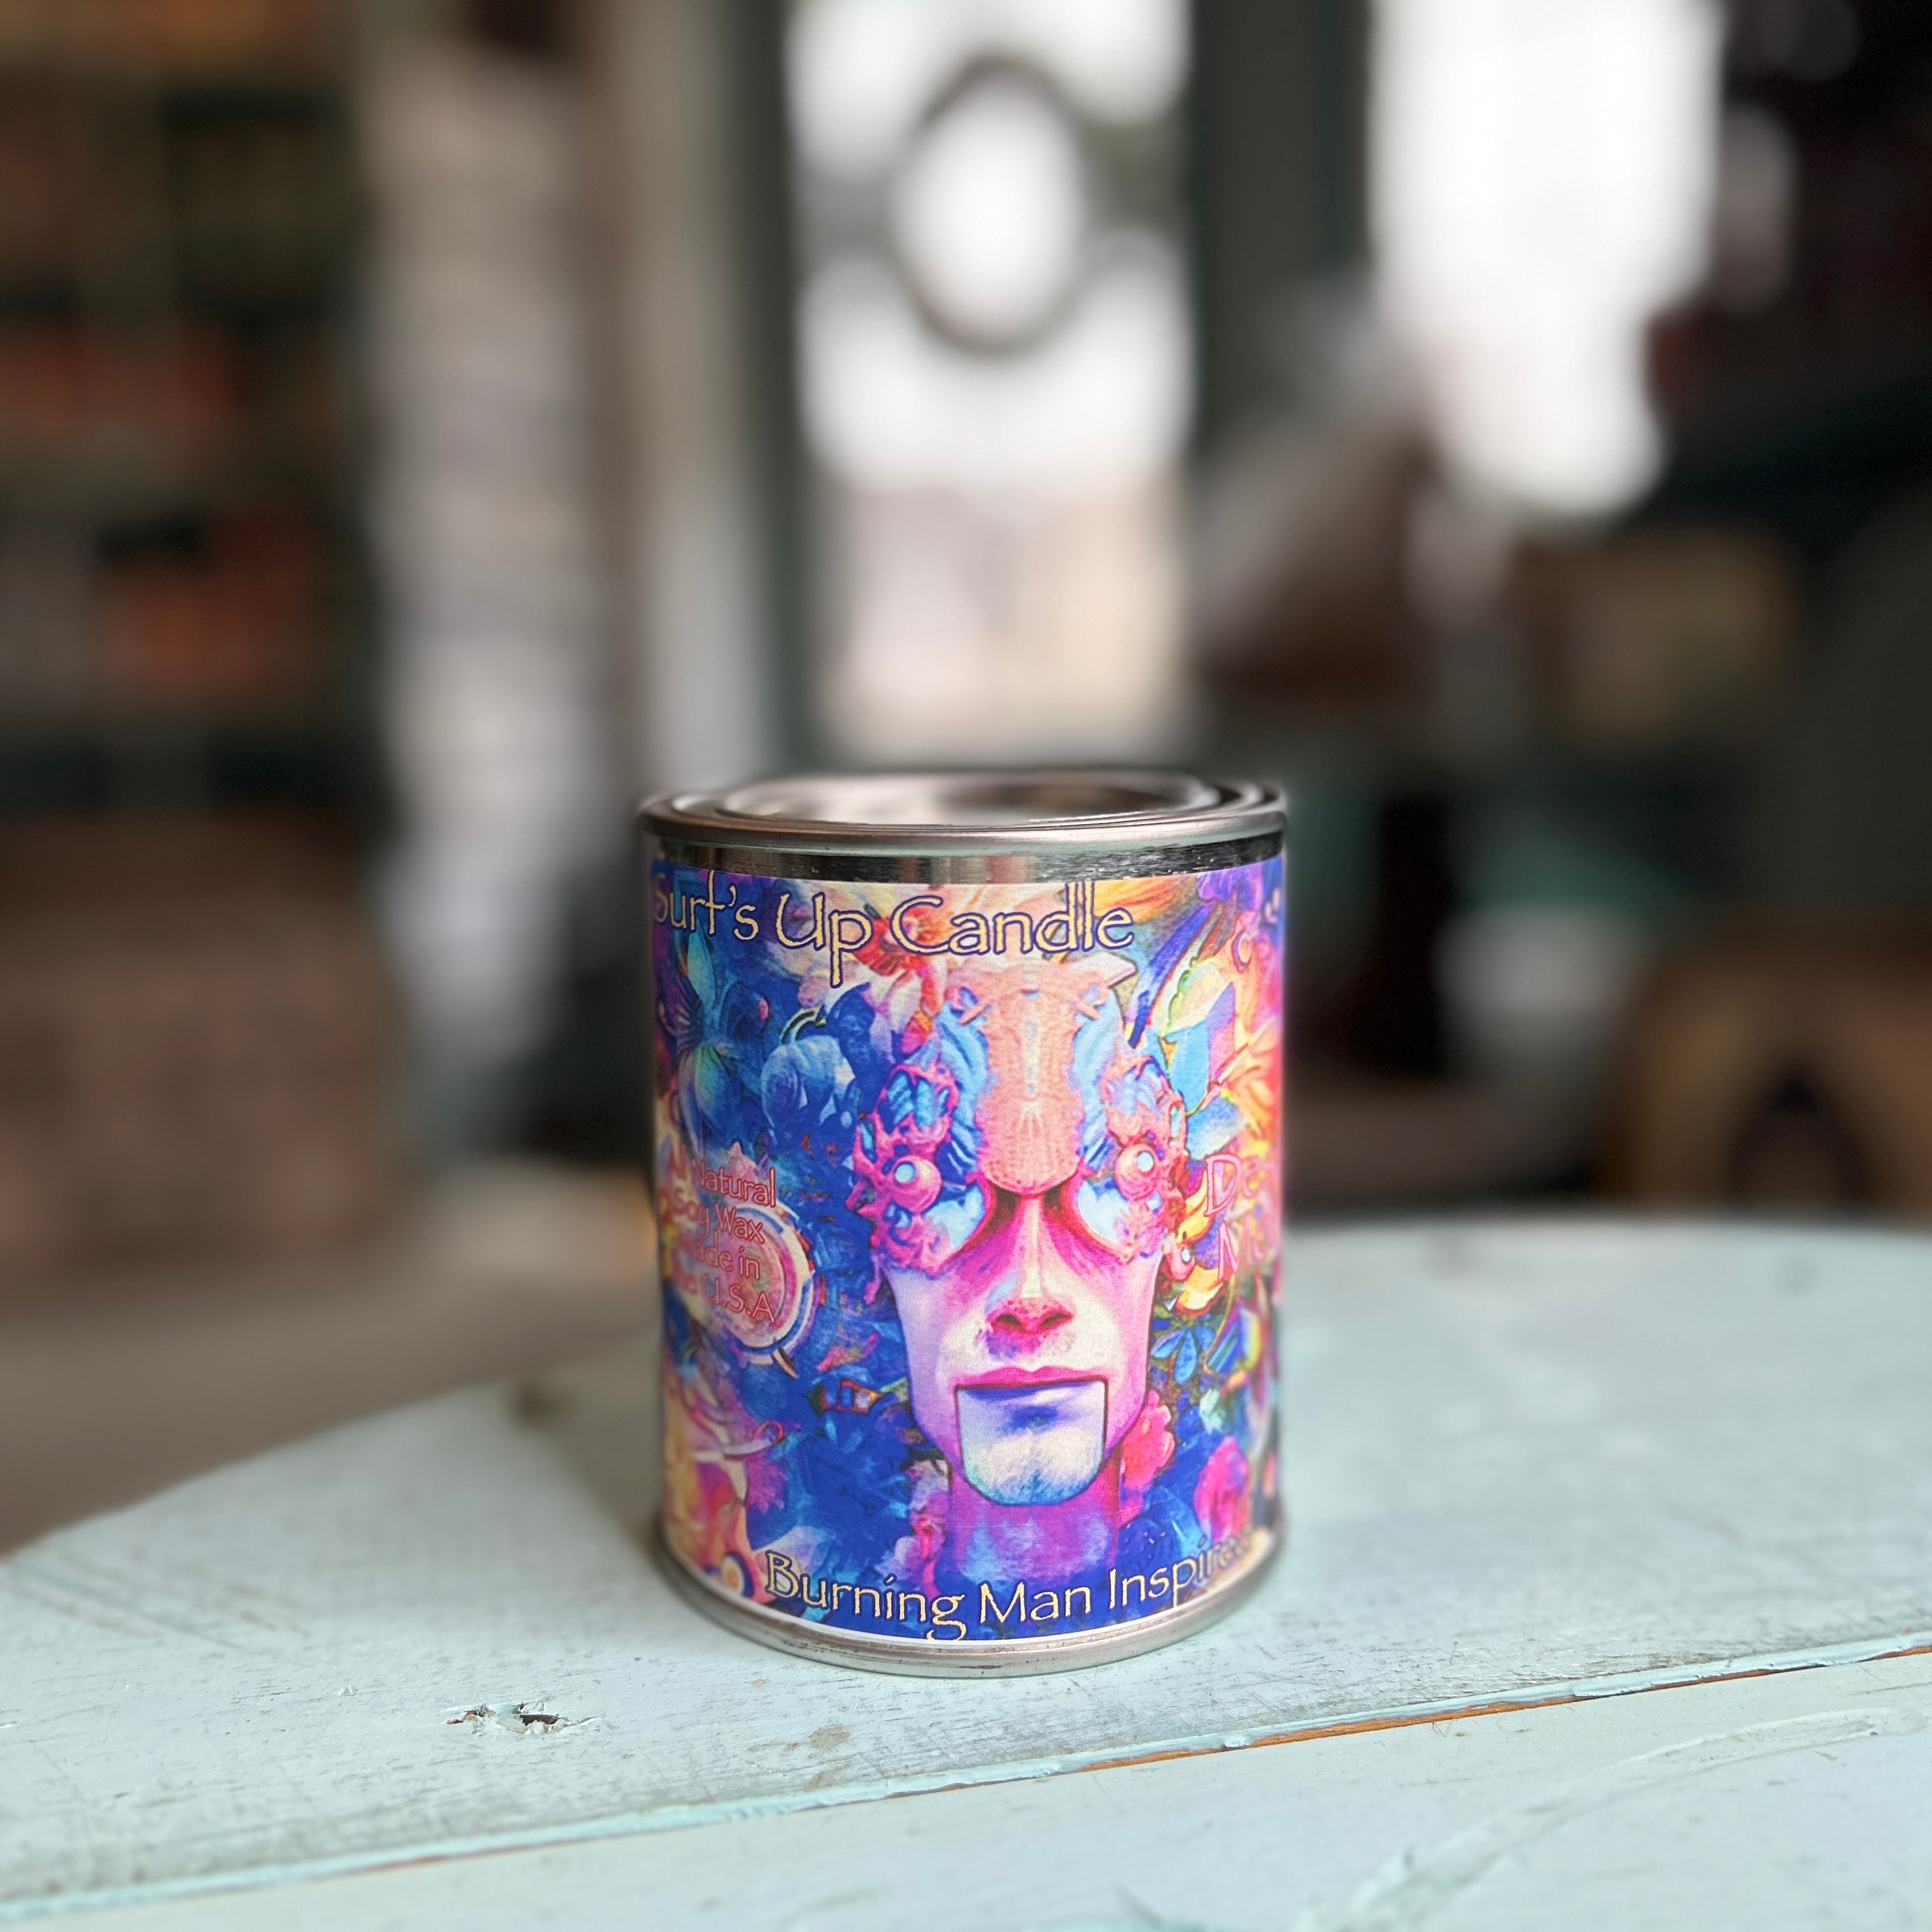 Psychodelic Desert Moon Paint Can Candle - Burning Man Inspired Collection